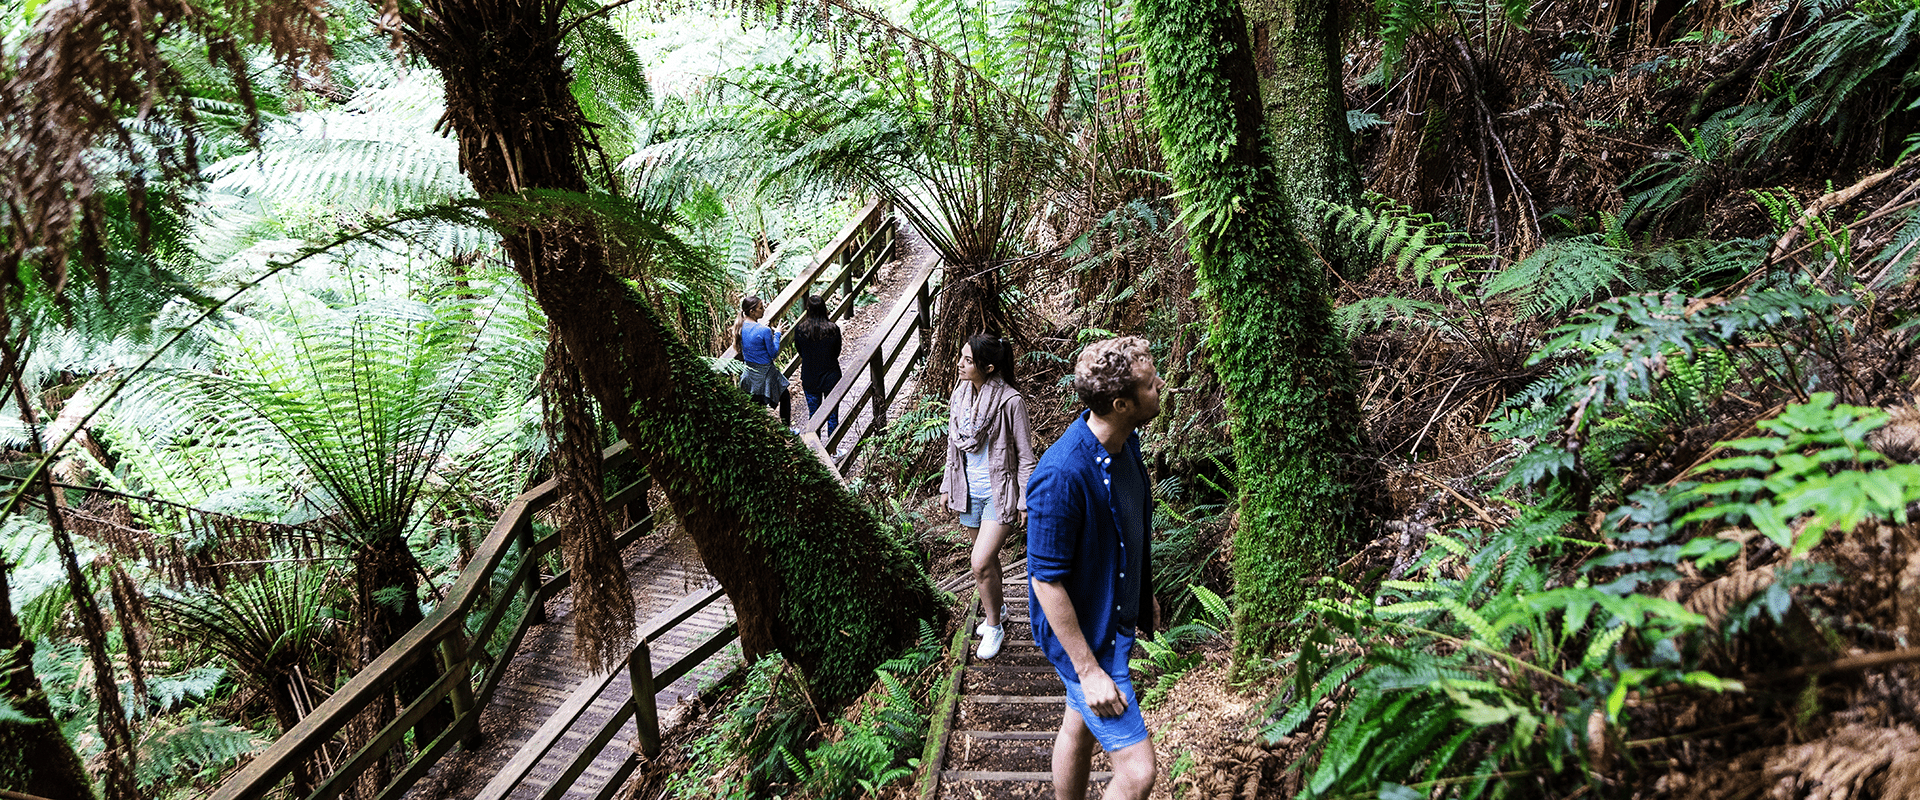 A couple walking up some forest steps surrounded by lush tree ferns and dense understory vegetation cover.